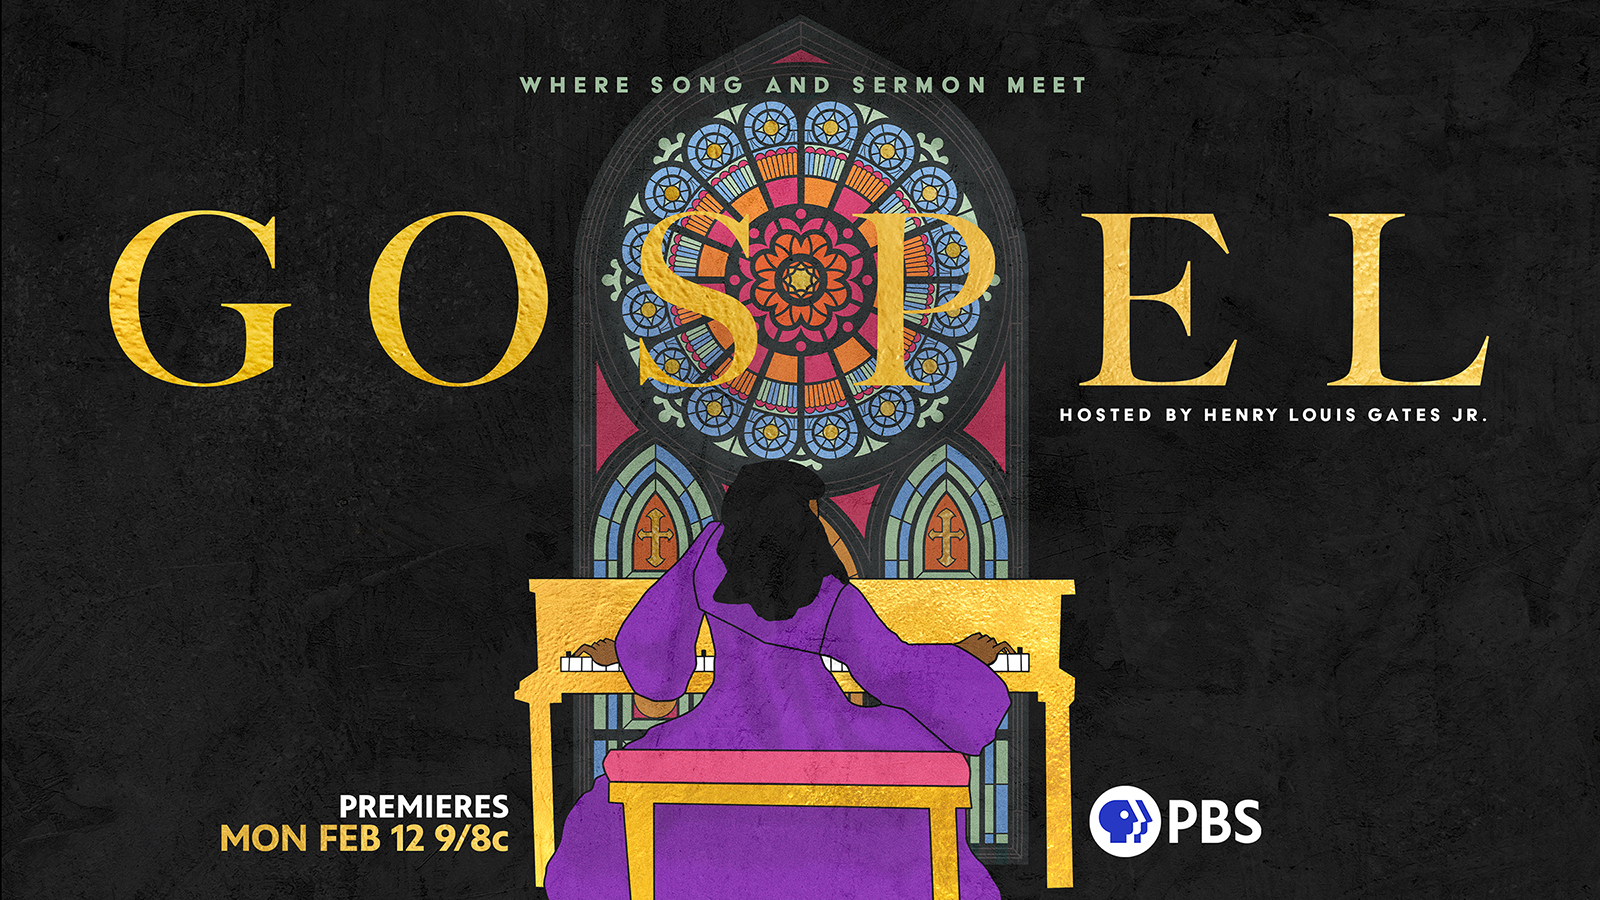 “Gospel” promotional poster. (Image courtesy PBS)